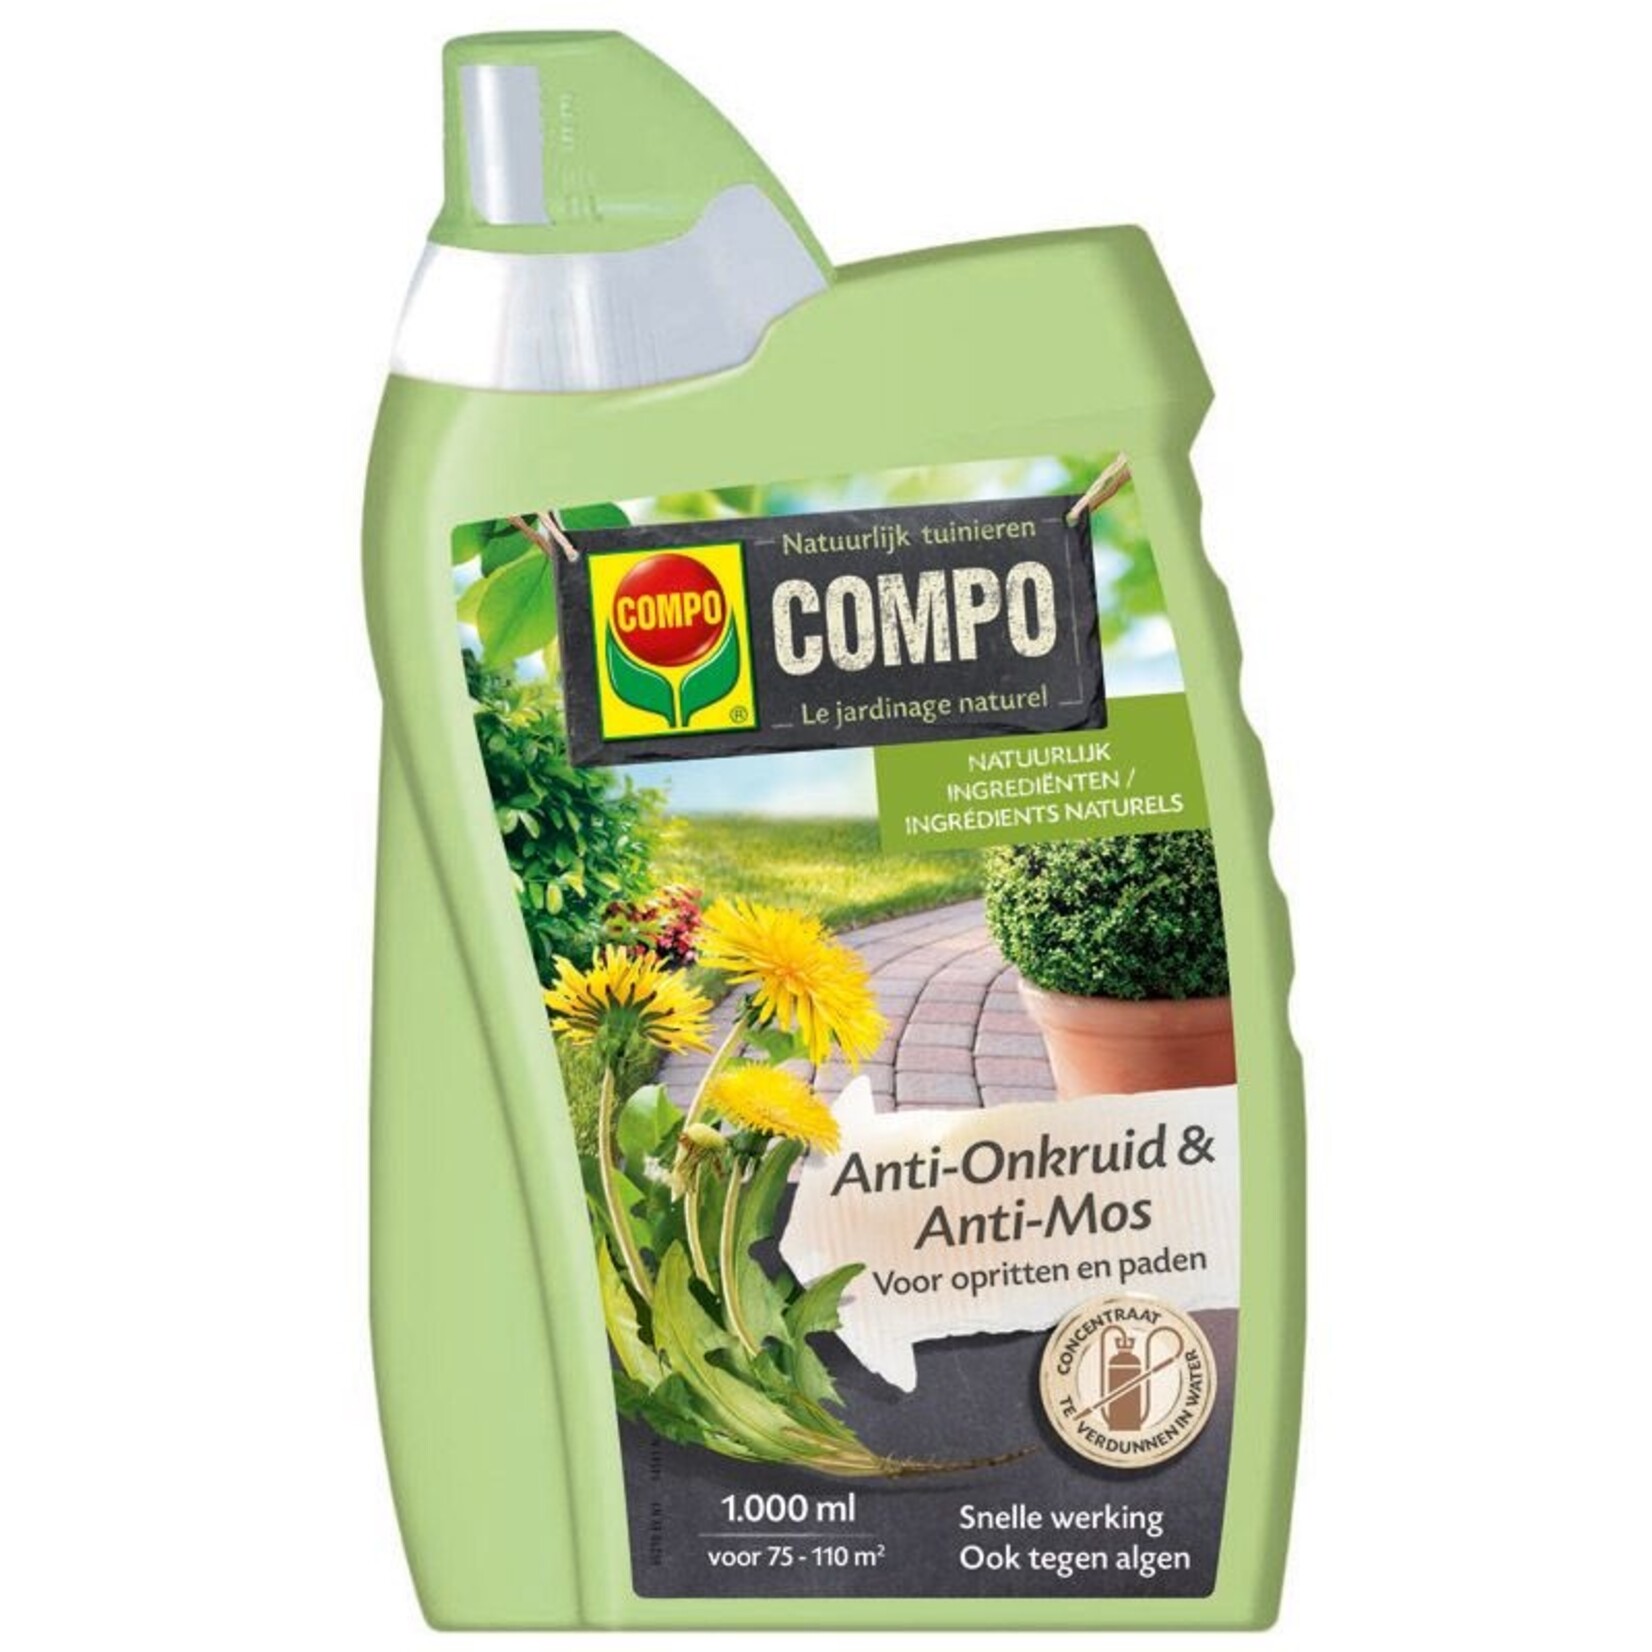 Compo Anti-Onkruid & Anti-Mos Opritten & Paden Concentraat 1L